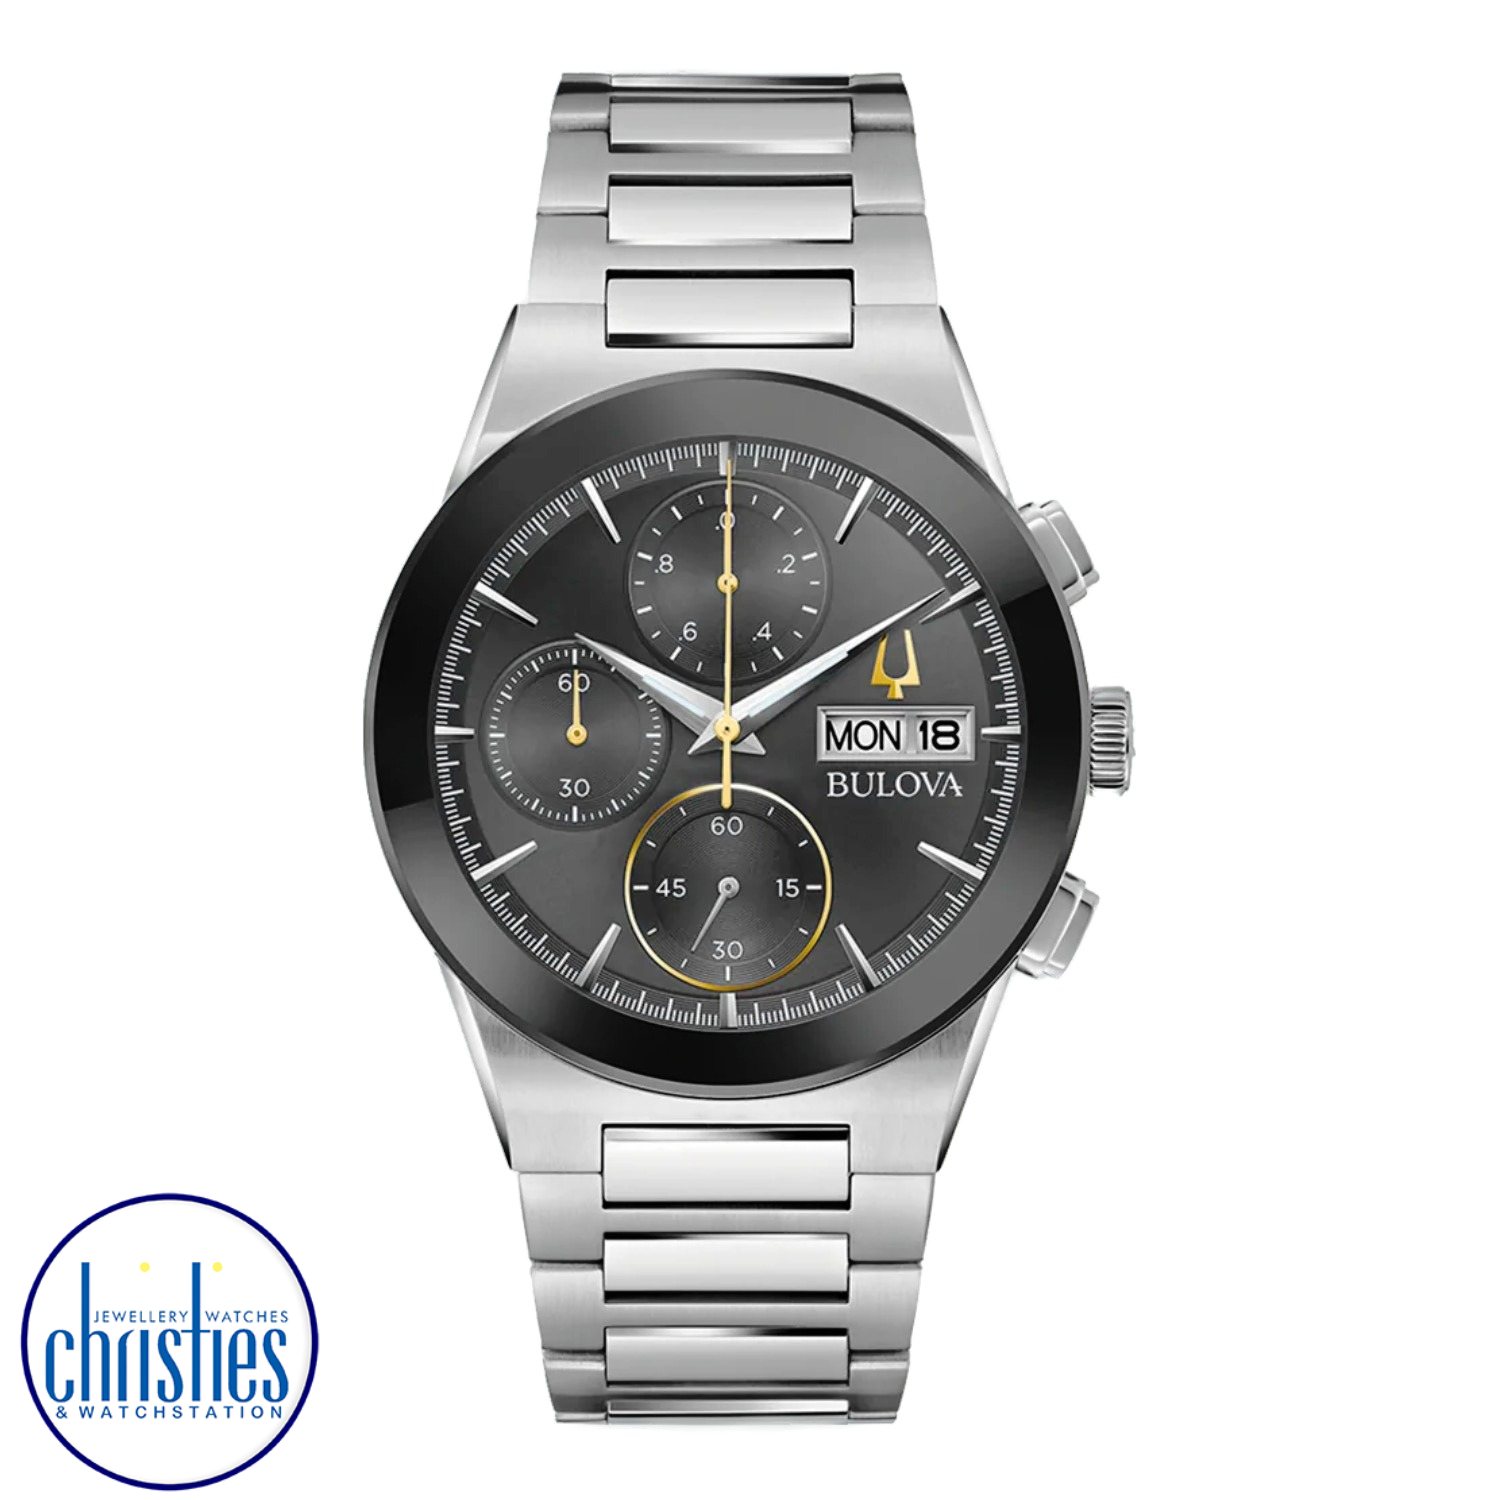 96C149 Bulova Men's Classic Modern Watch. The Bulova Modern Millennia collection's sophisticated chronograph watch seamlessly combines form and function.